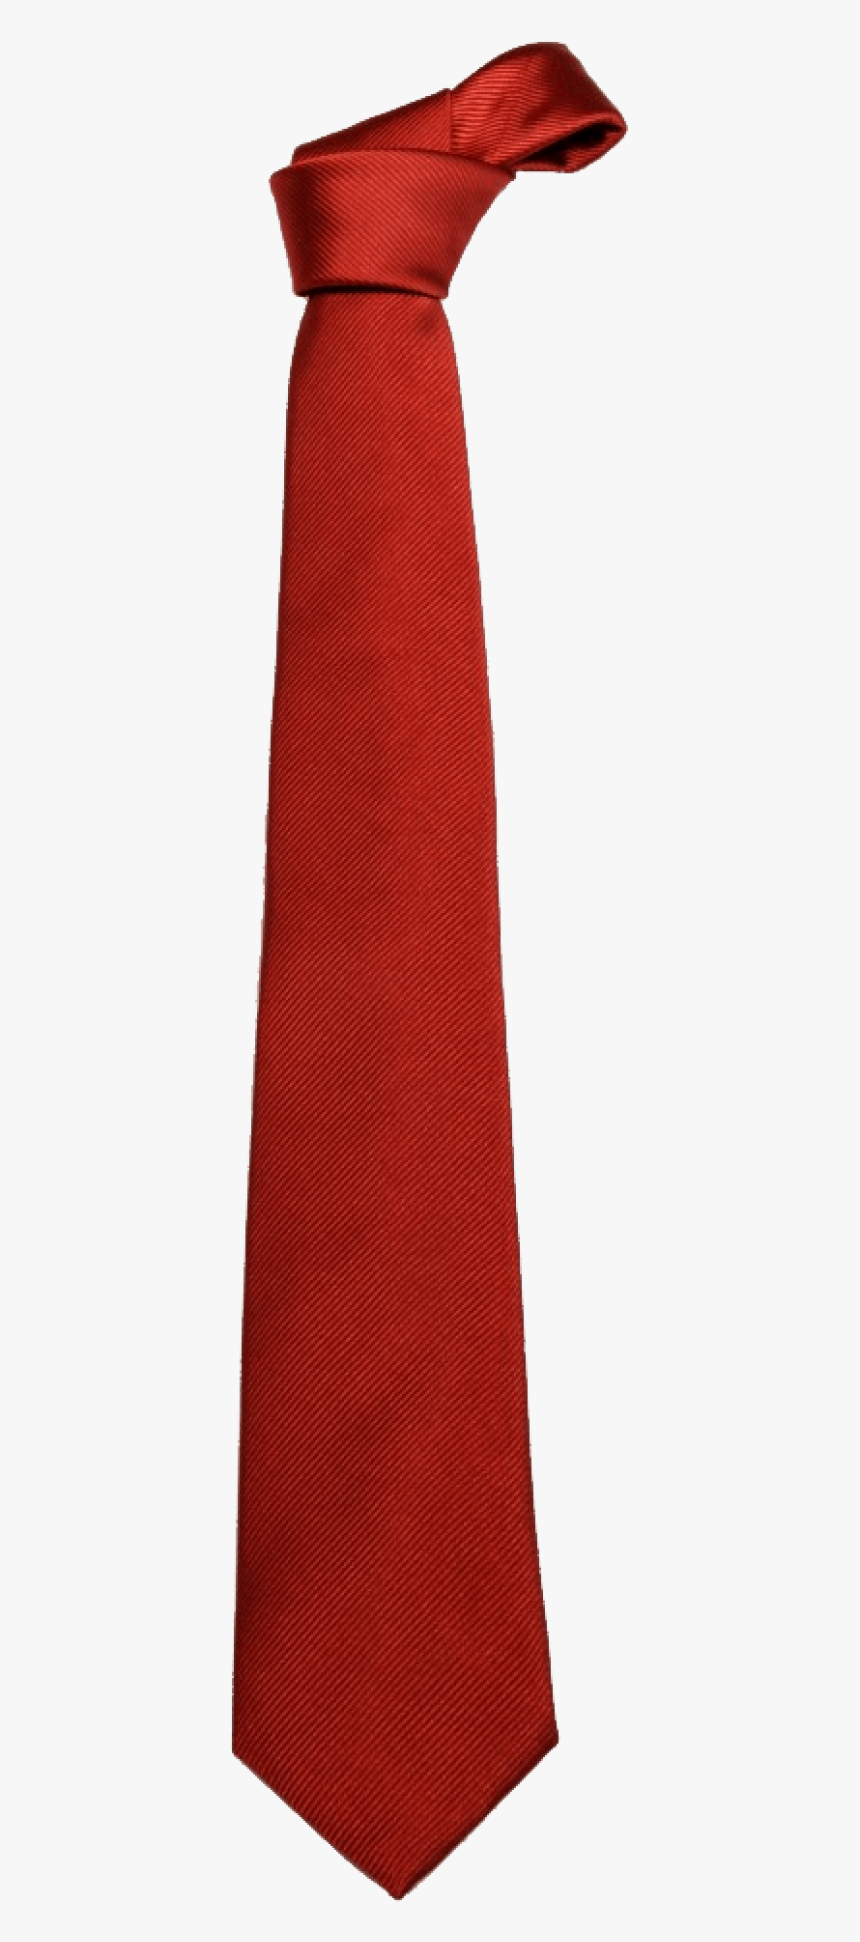 Red Tie Png Image"
								 Title= - Transparent Background Red Tie Png, Png Download, Free Download